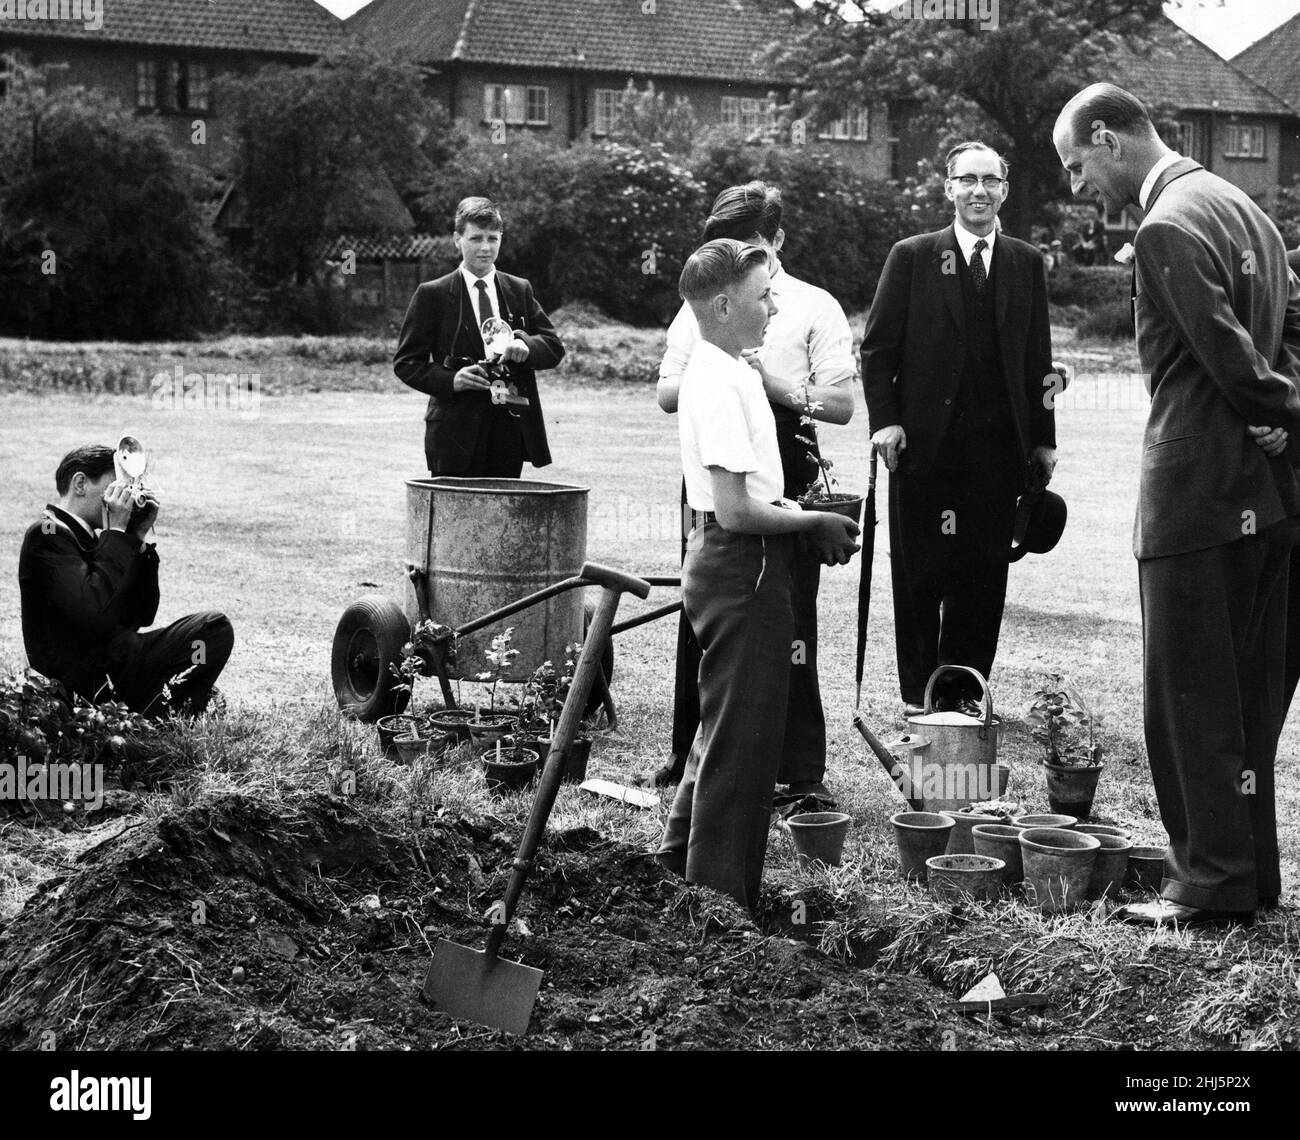 Prince Philip visits Eastbourne Secondary Modern School, Darlington. John Dobson and Ian Wright are taking photography as part of the Duke of Edinburgh's award scheme and they were designated 'official photographers' for the Duke's visit. 25th June 1960. Stock Photo